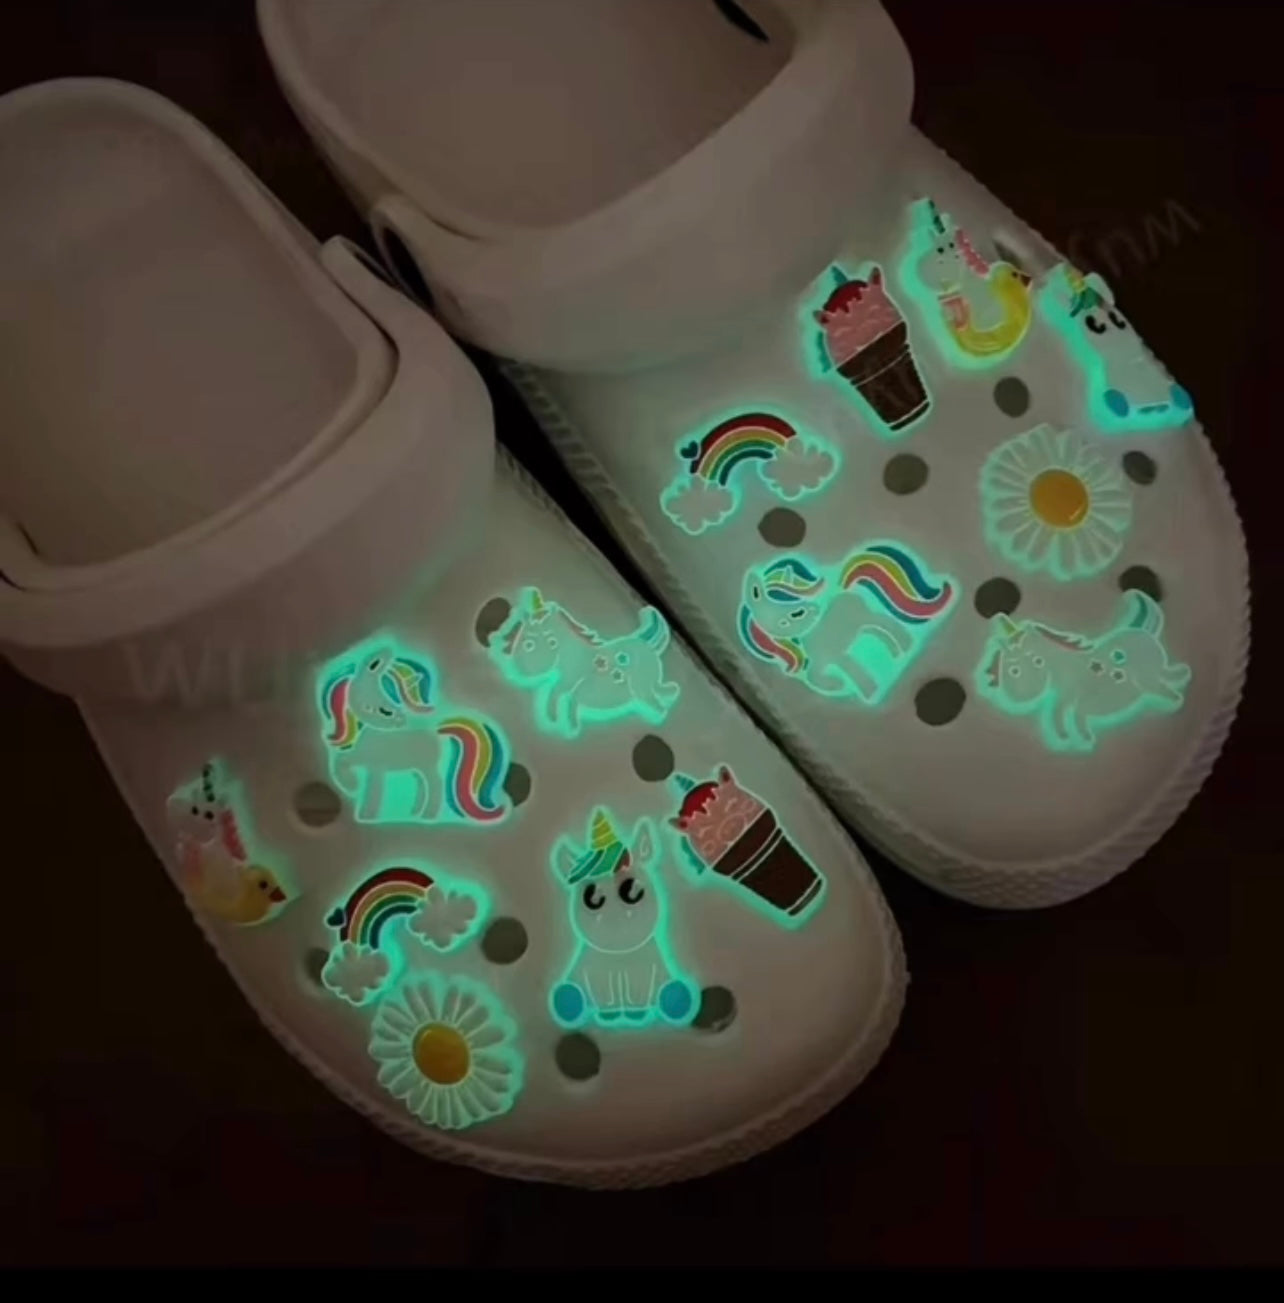 Glow in the dark croc charms